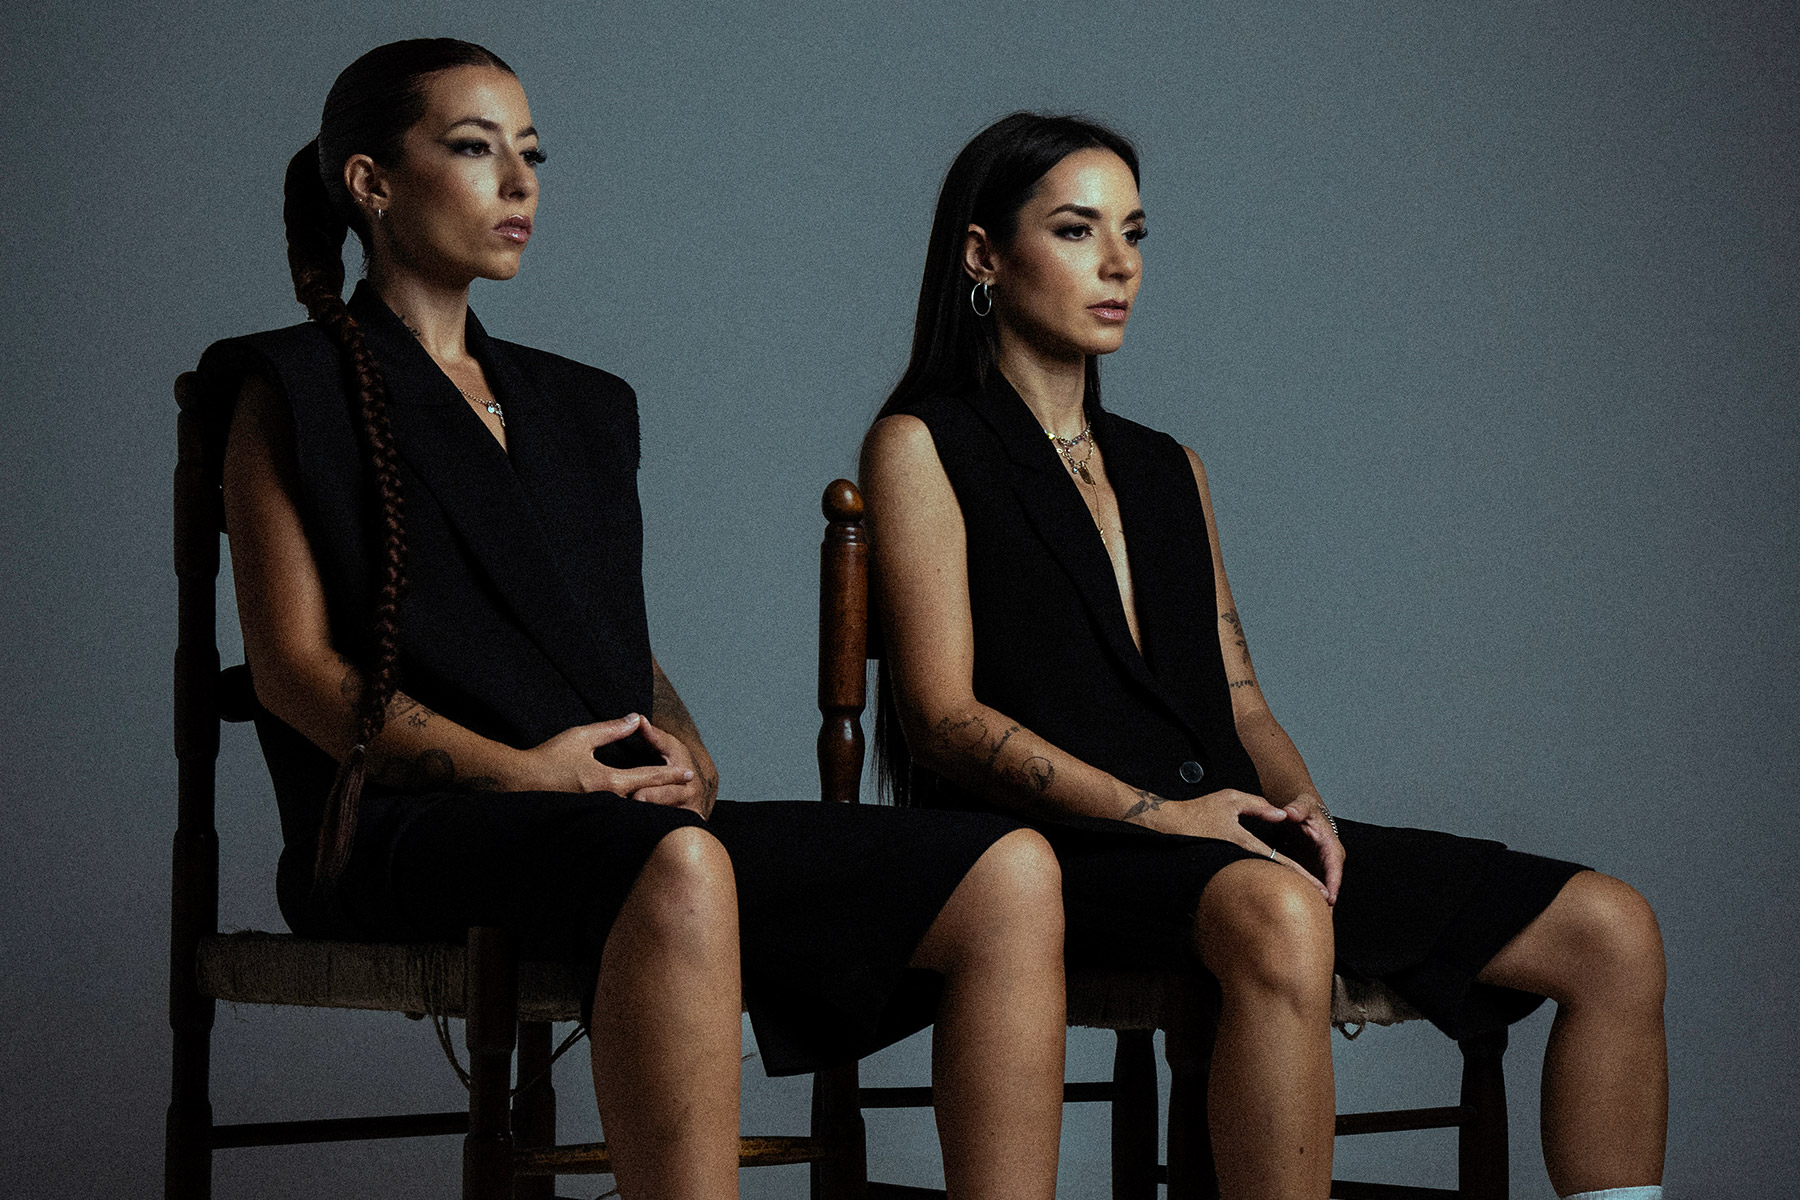 Giolì & Assia unveil new single ‘The Point of Living’, share video